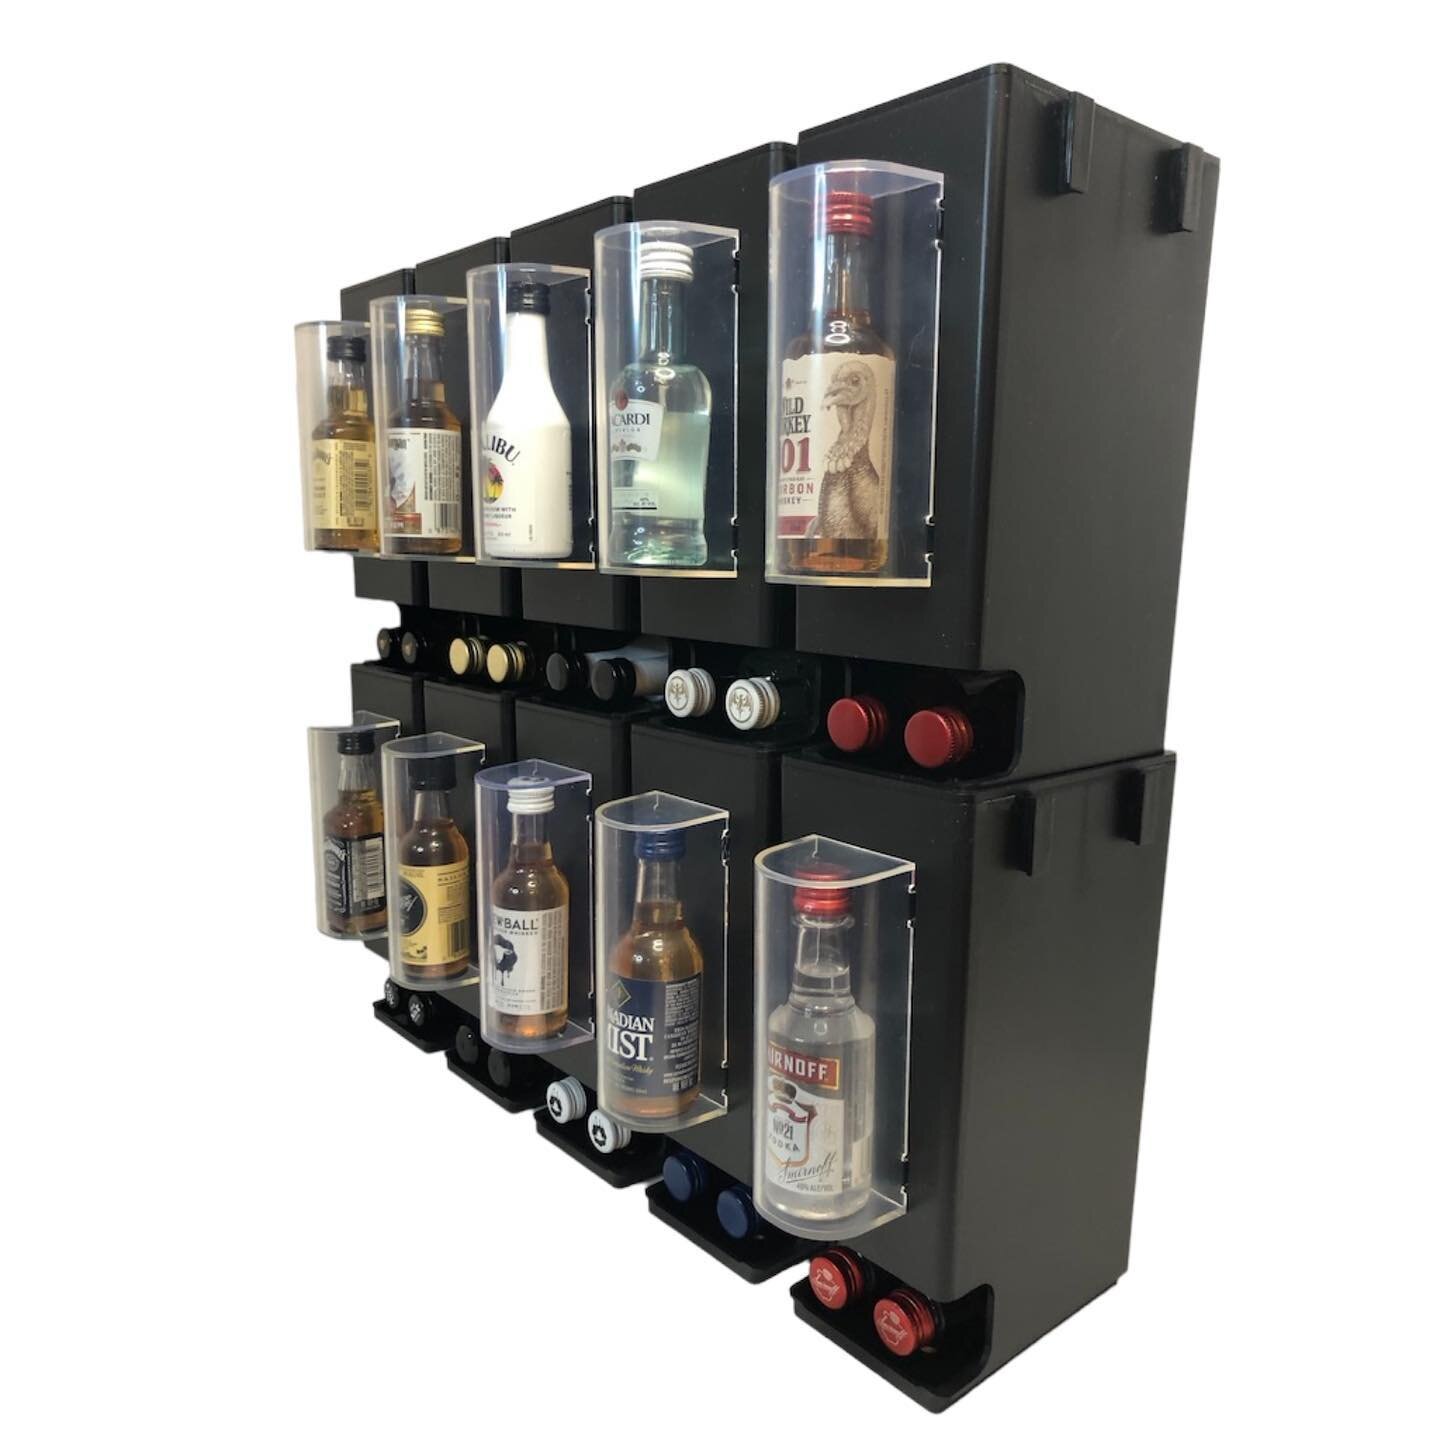 Our black displays have a matte finish and modern appeal. The low profile can save space by stacking them up on the counter and shelf.

Shooter Displays can also boost sales by encouraging customers to make last minute purchases at check out!! ORGANI